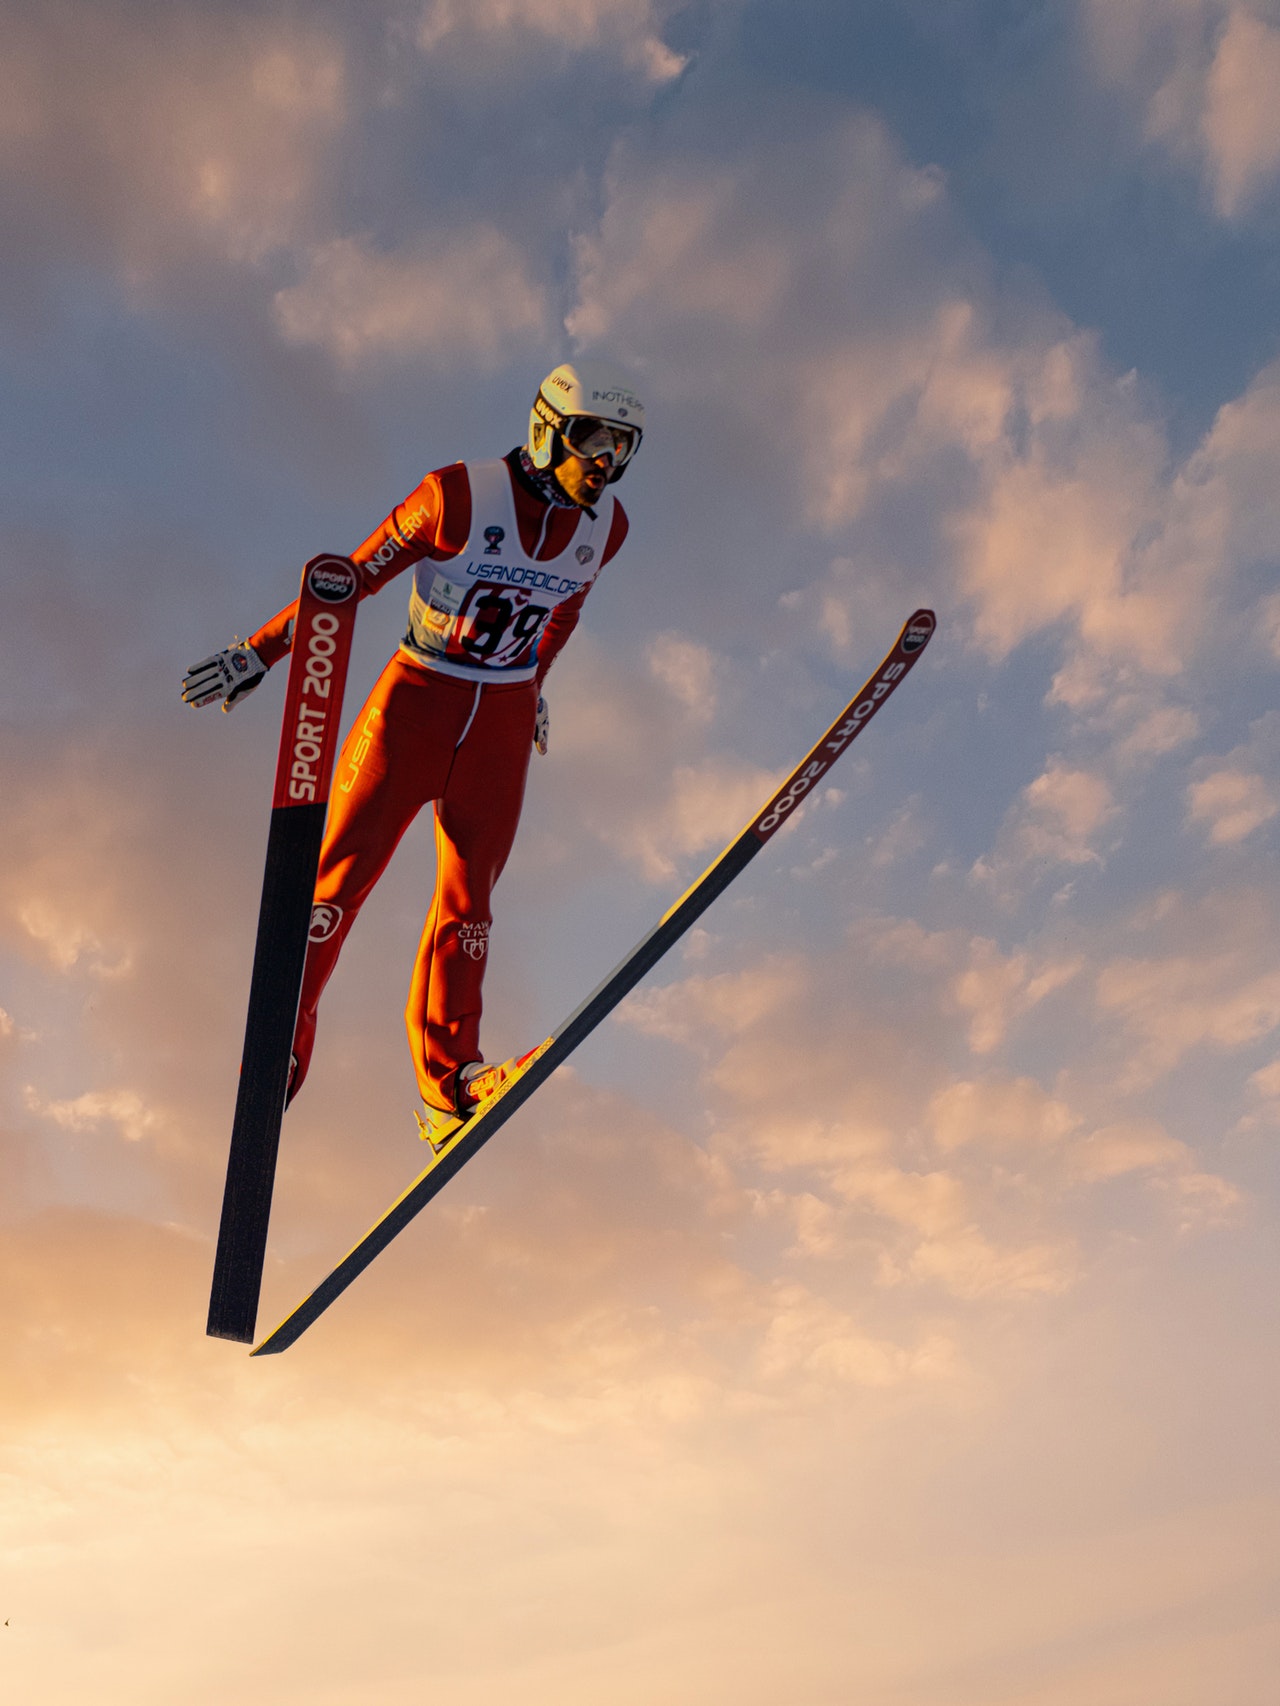 What the Winter Olympics can teach leaders about high performance